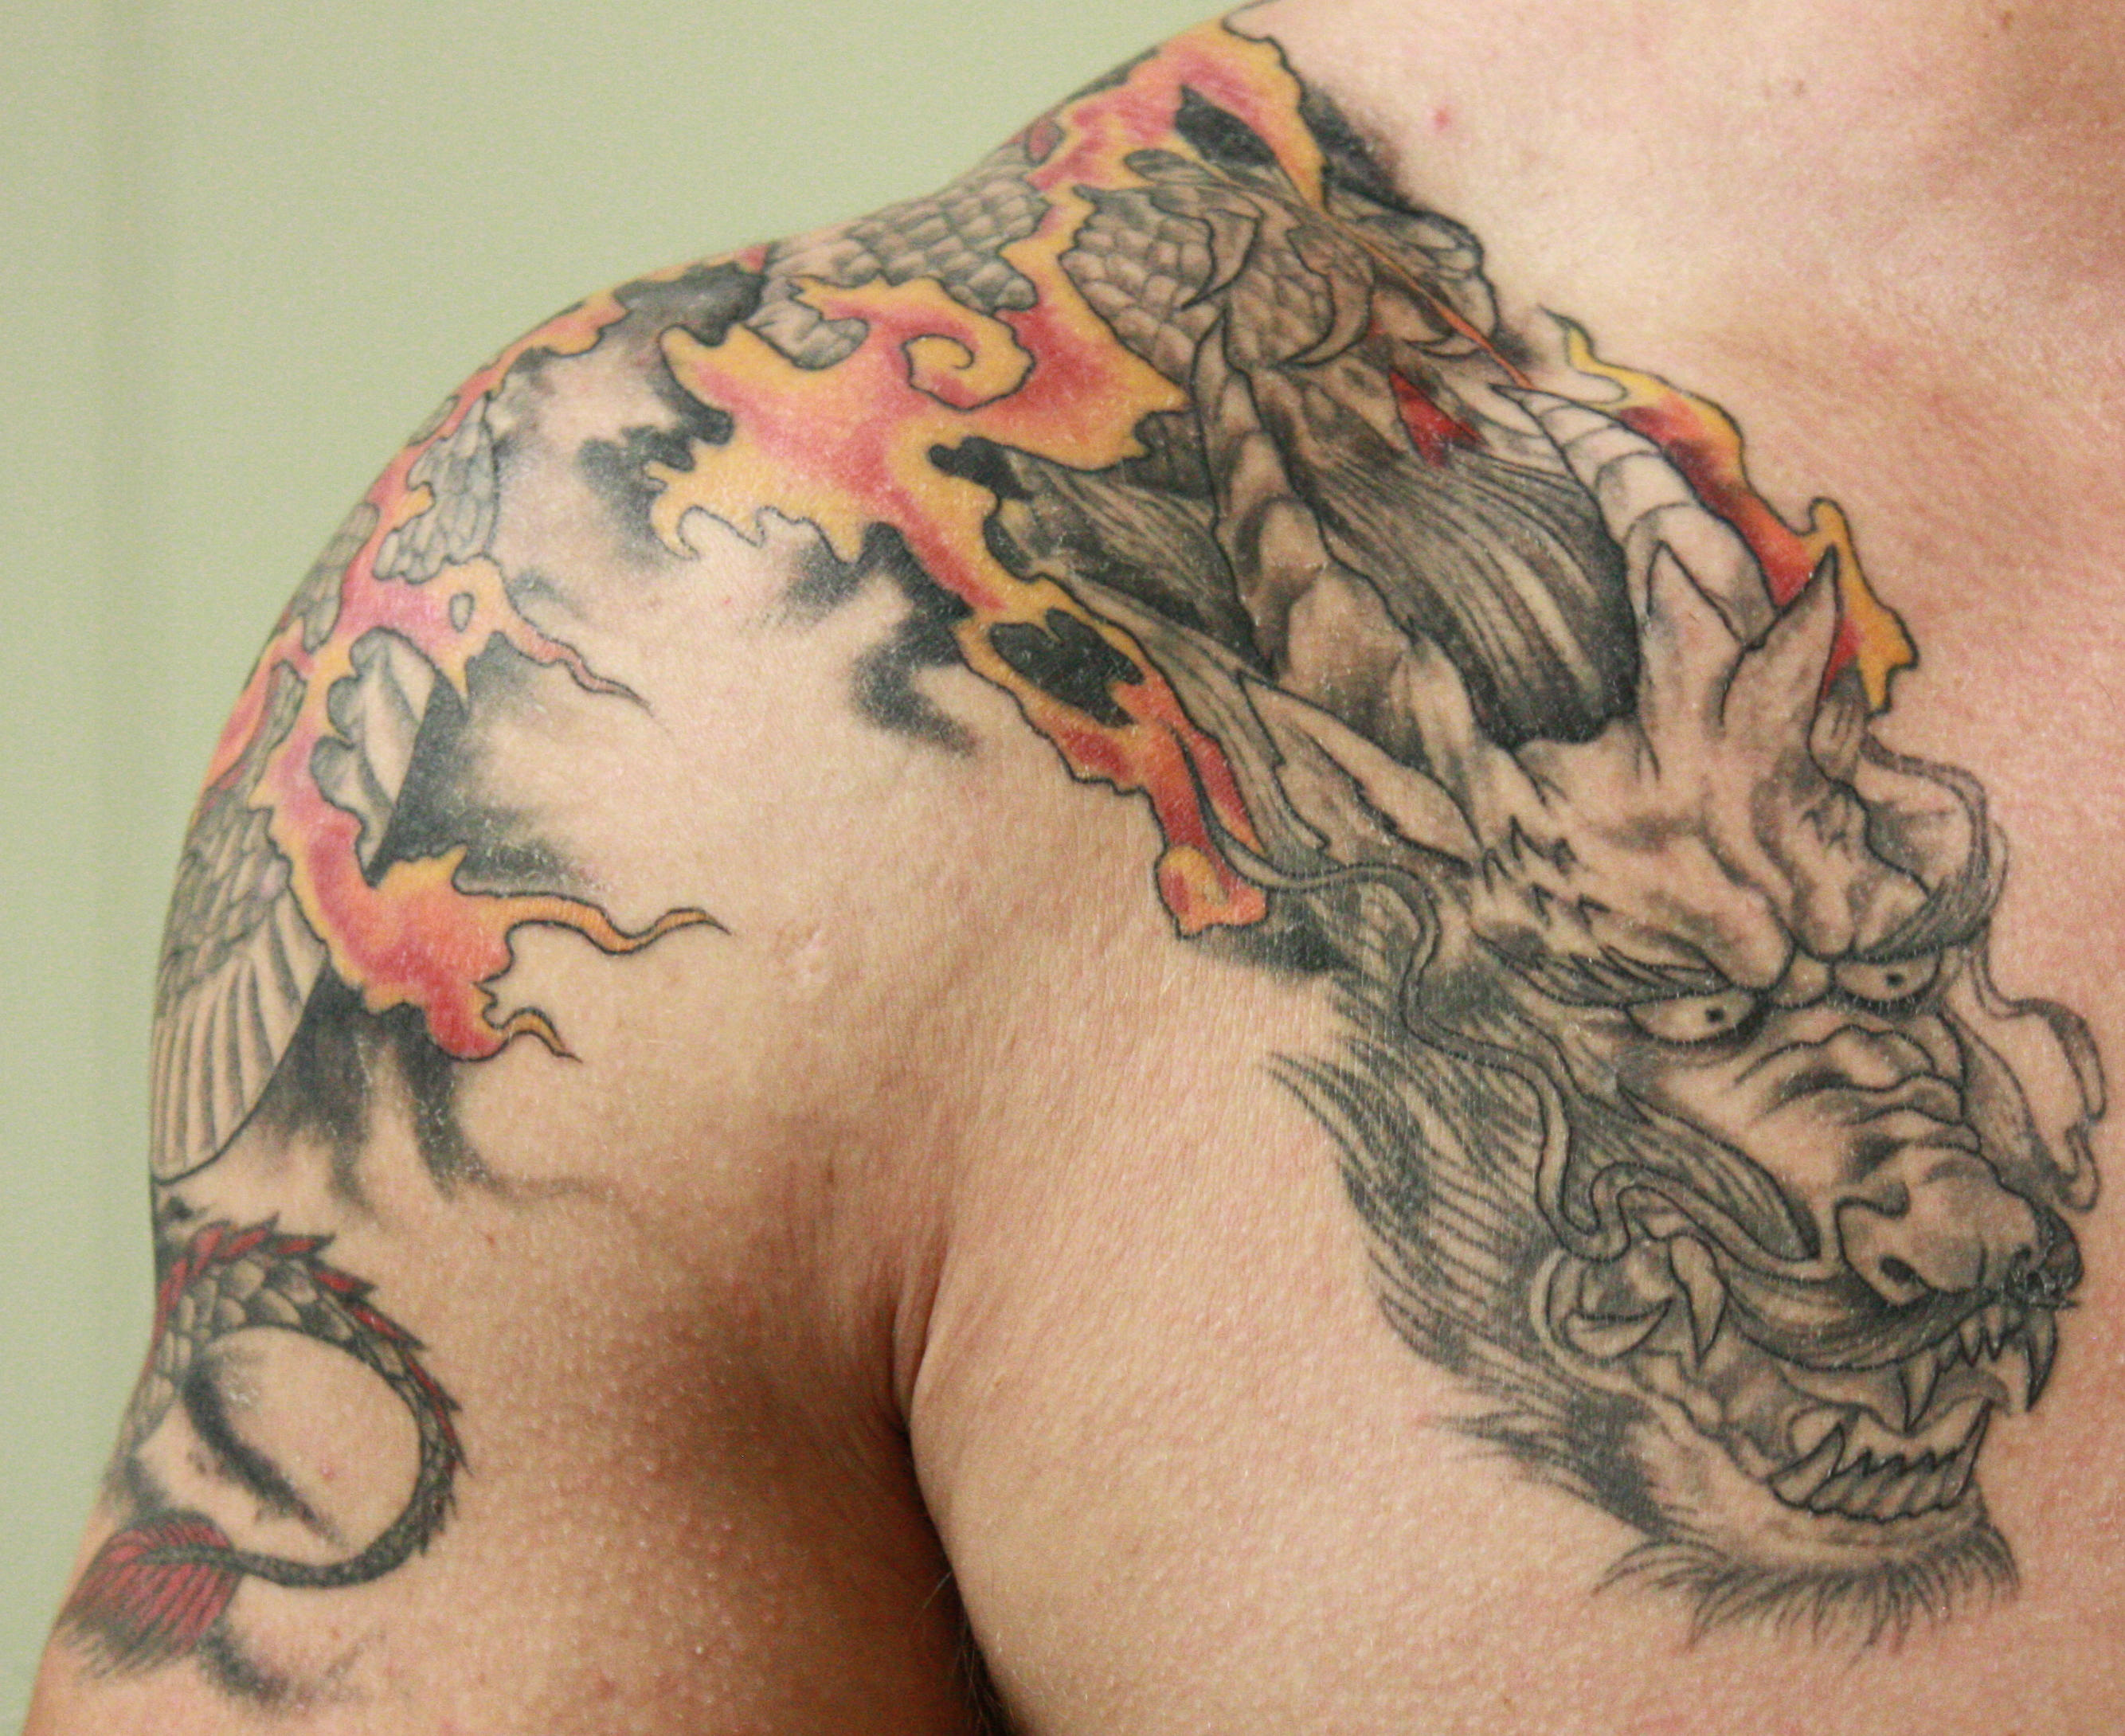 Nothing Says You Like a Tattoo: NIST Workshop Considers Ways to Improve  Tattoo Recognition | NIST